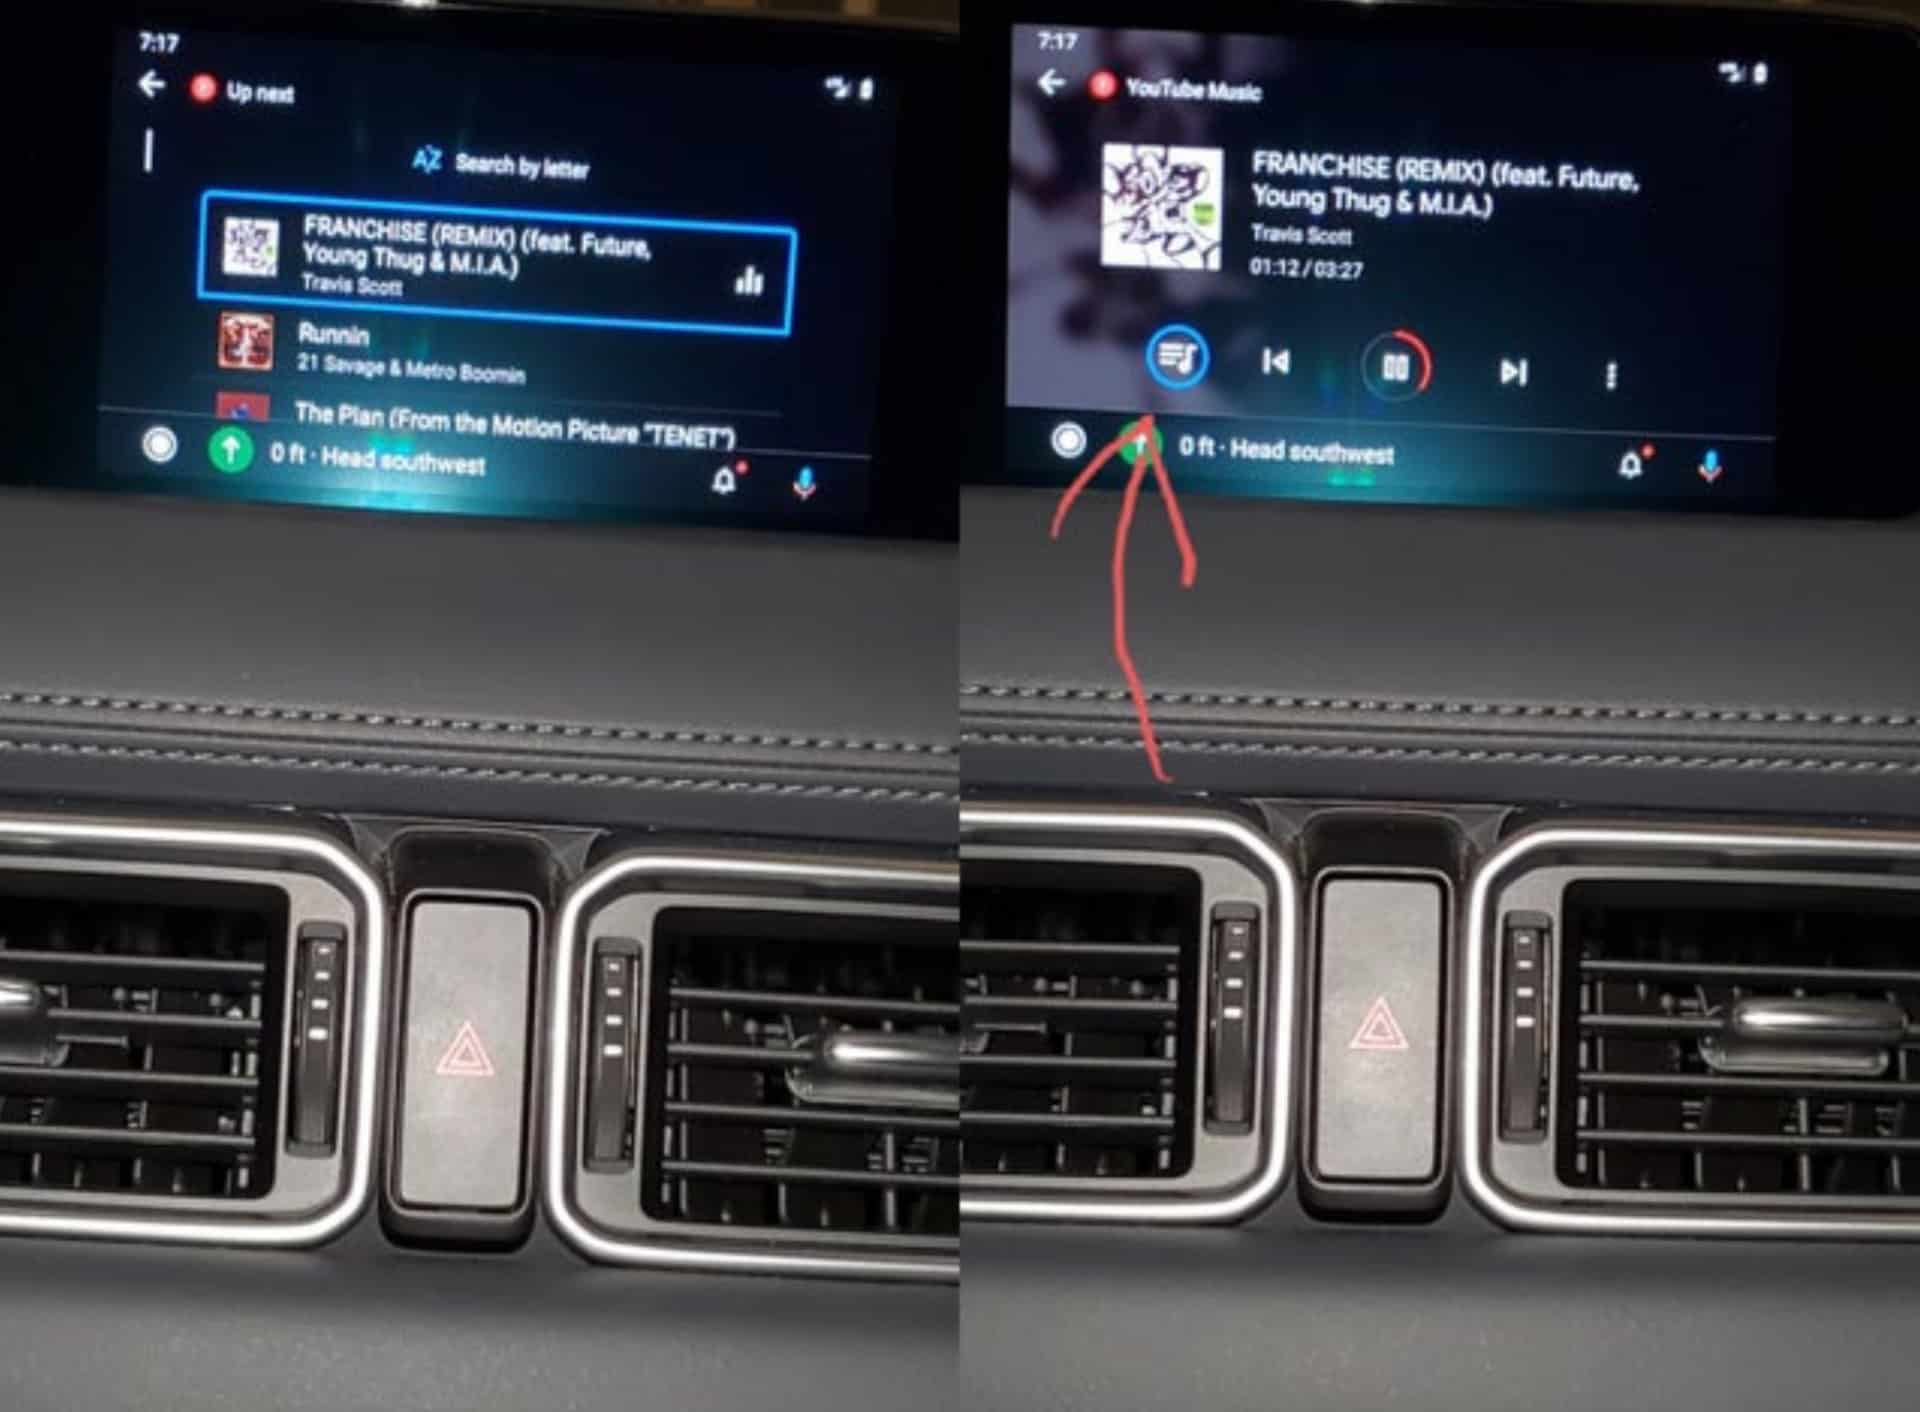 YouTube Music Adds a Playlist Button in Android Auto and Lets Free Users Play Uploaded Songs